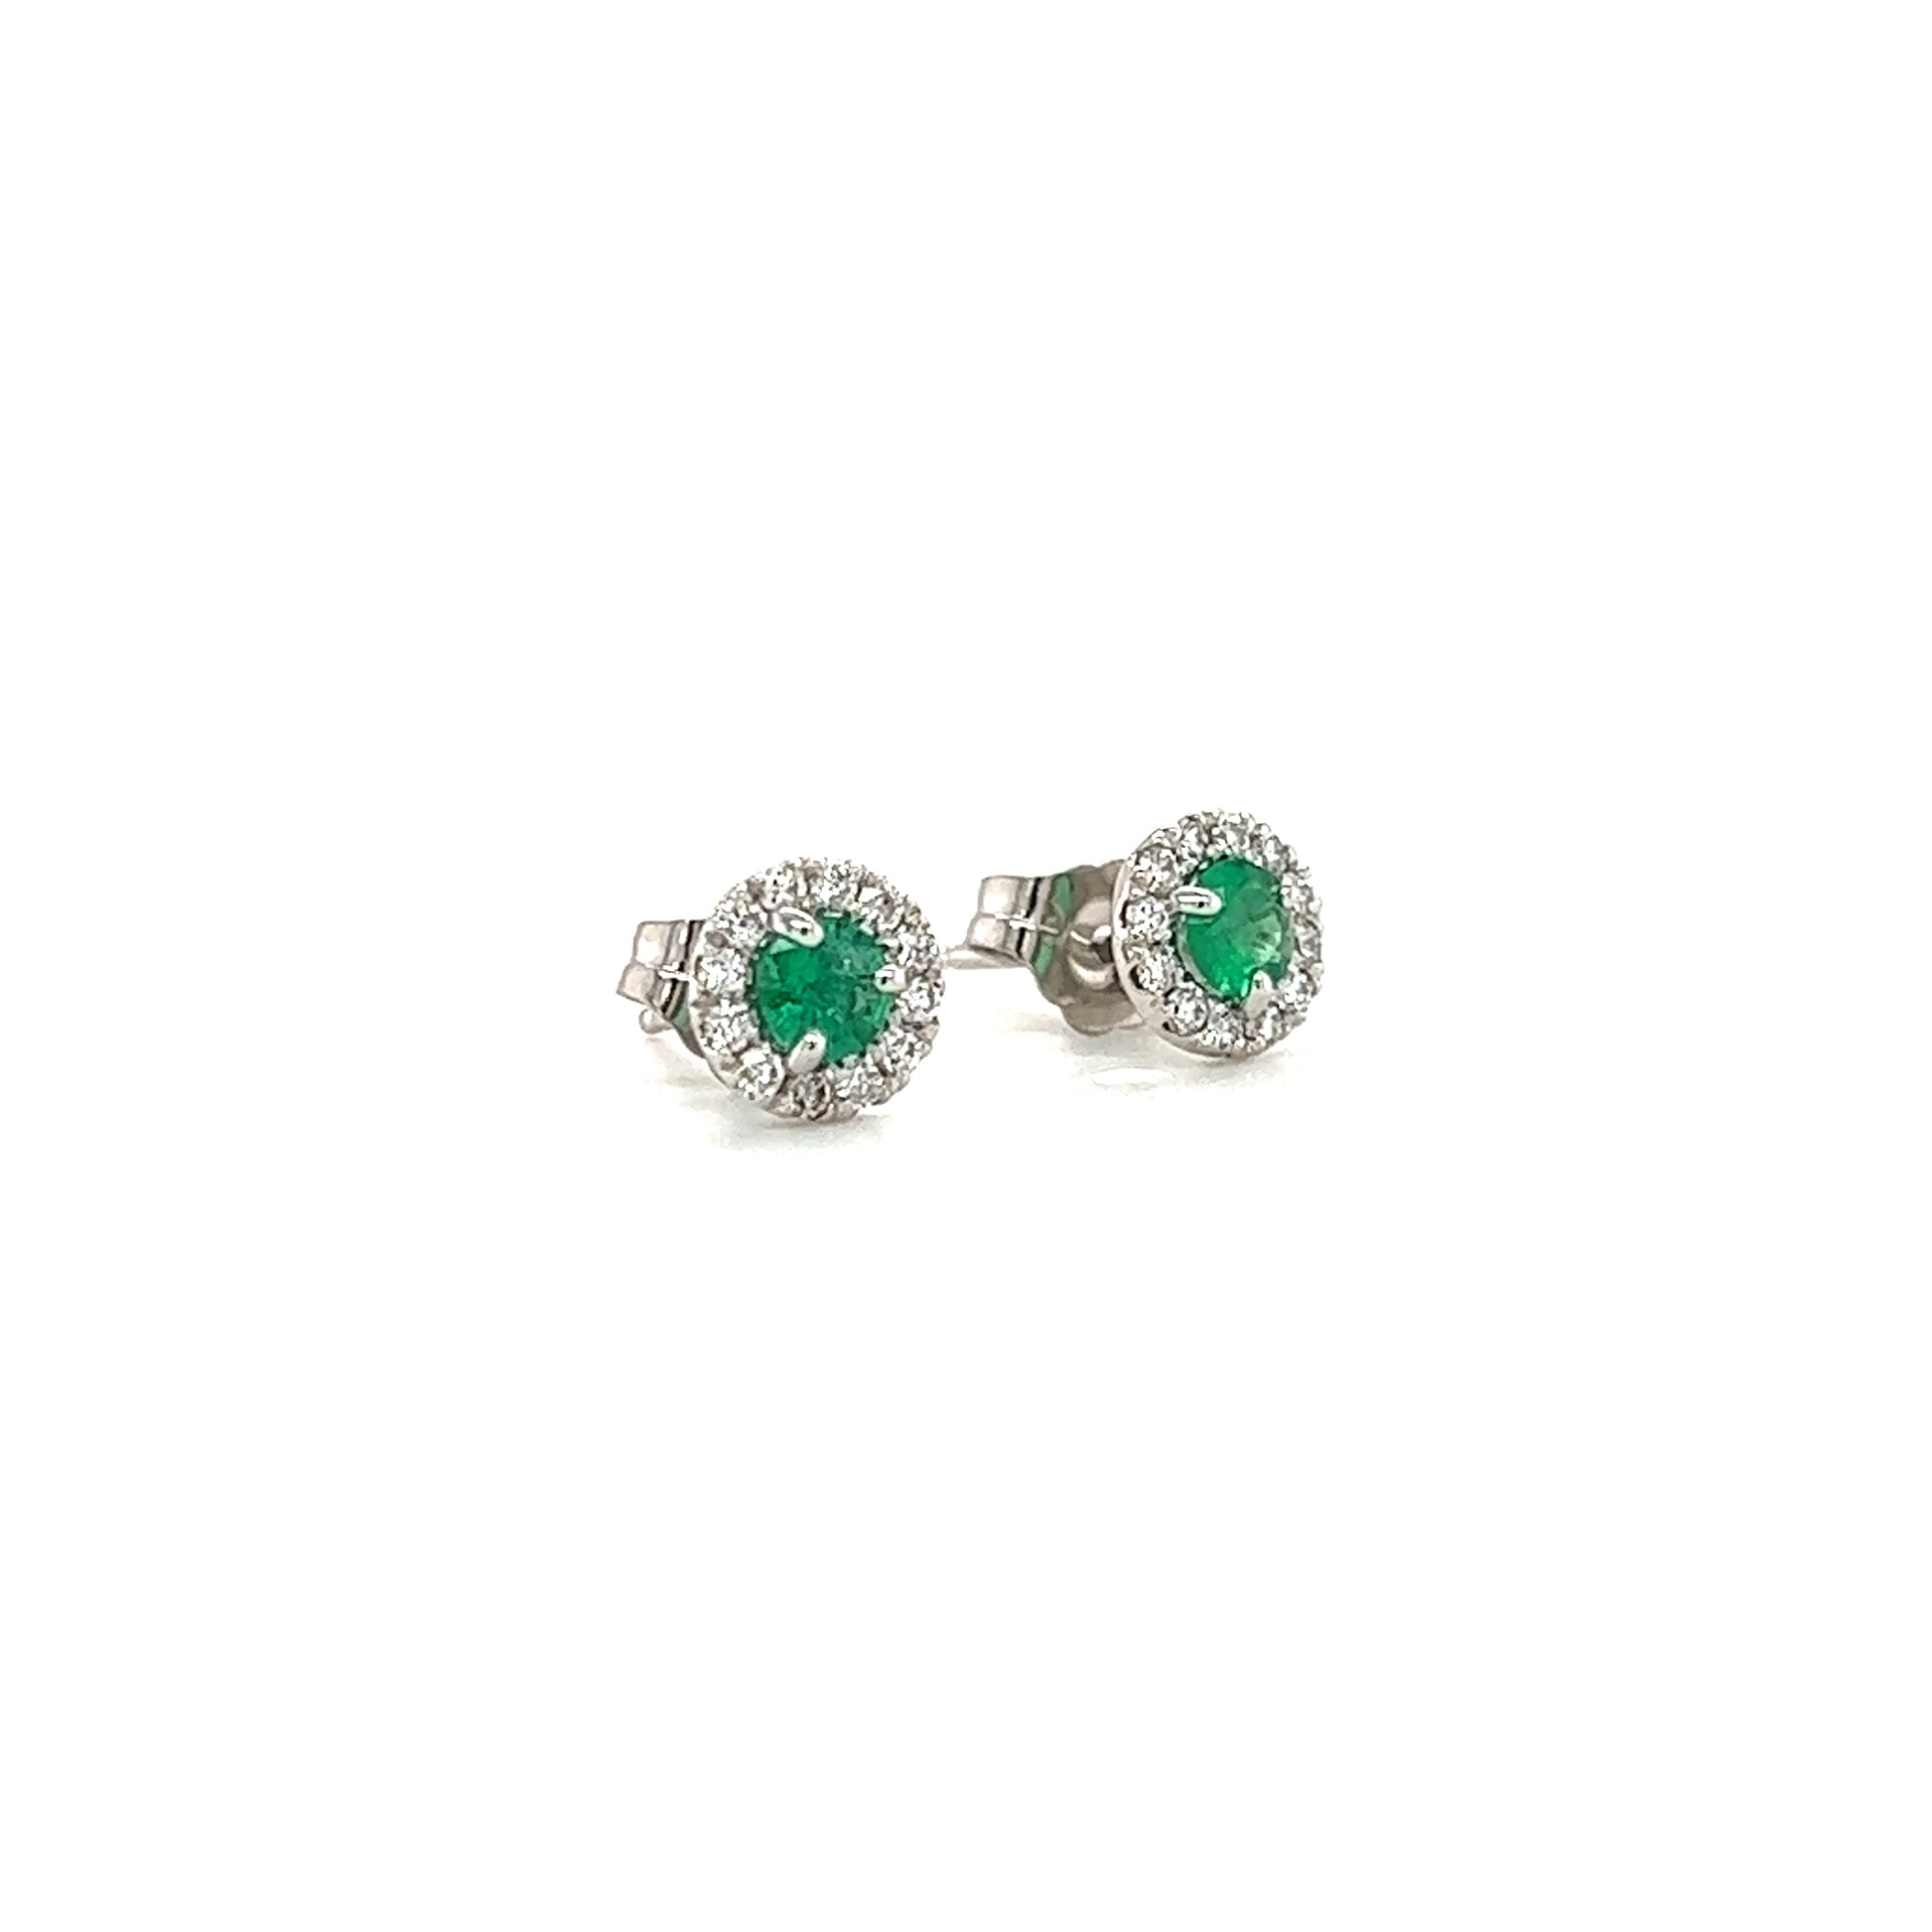 Round Emerald Stud Earrings with Diamond Halo in 14K White Gold Right Side View